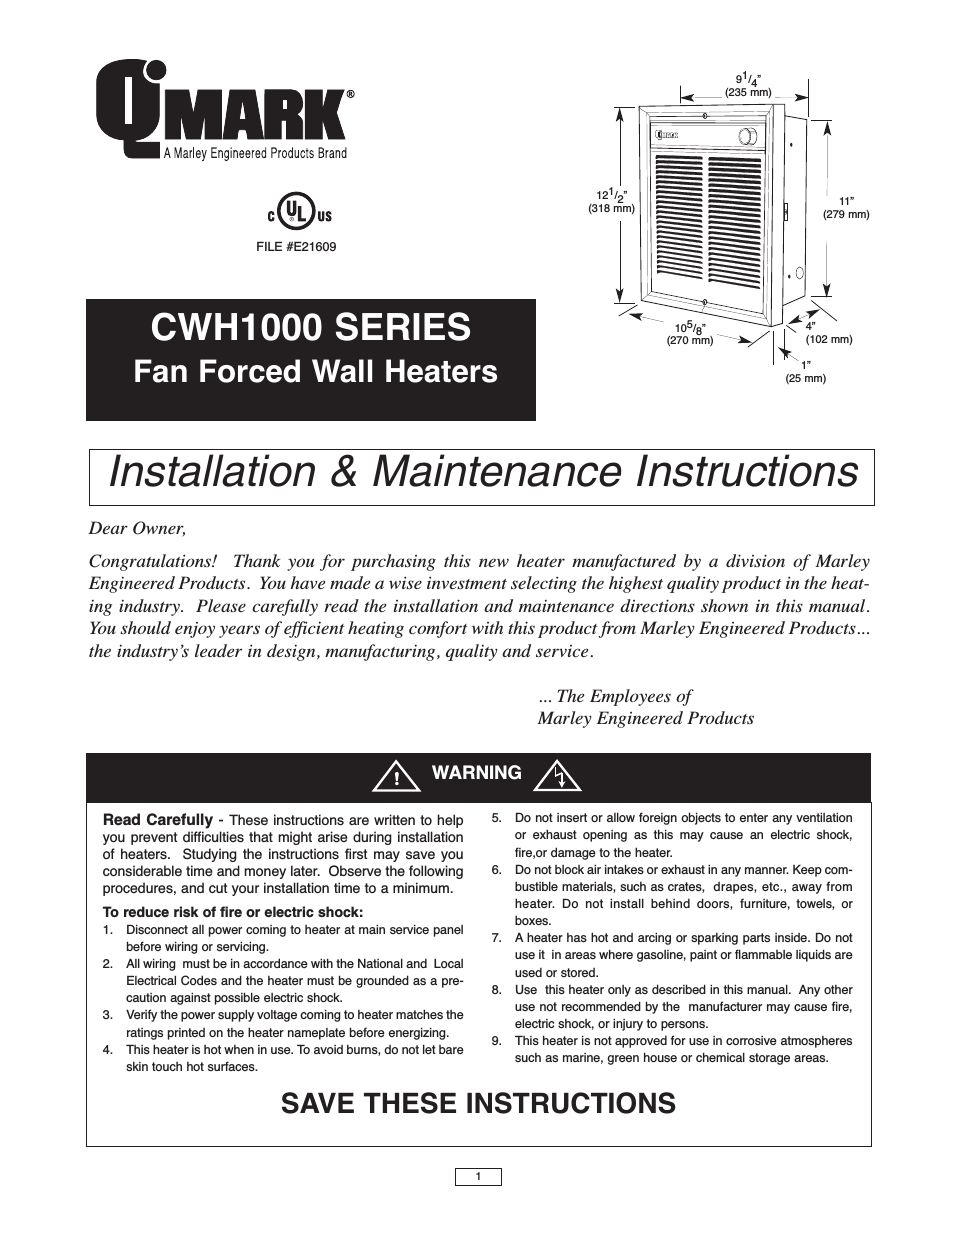 CWH1000 Series - Commercial Fan-Forced Wall Heaters